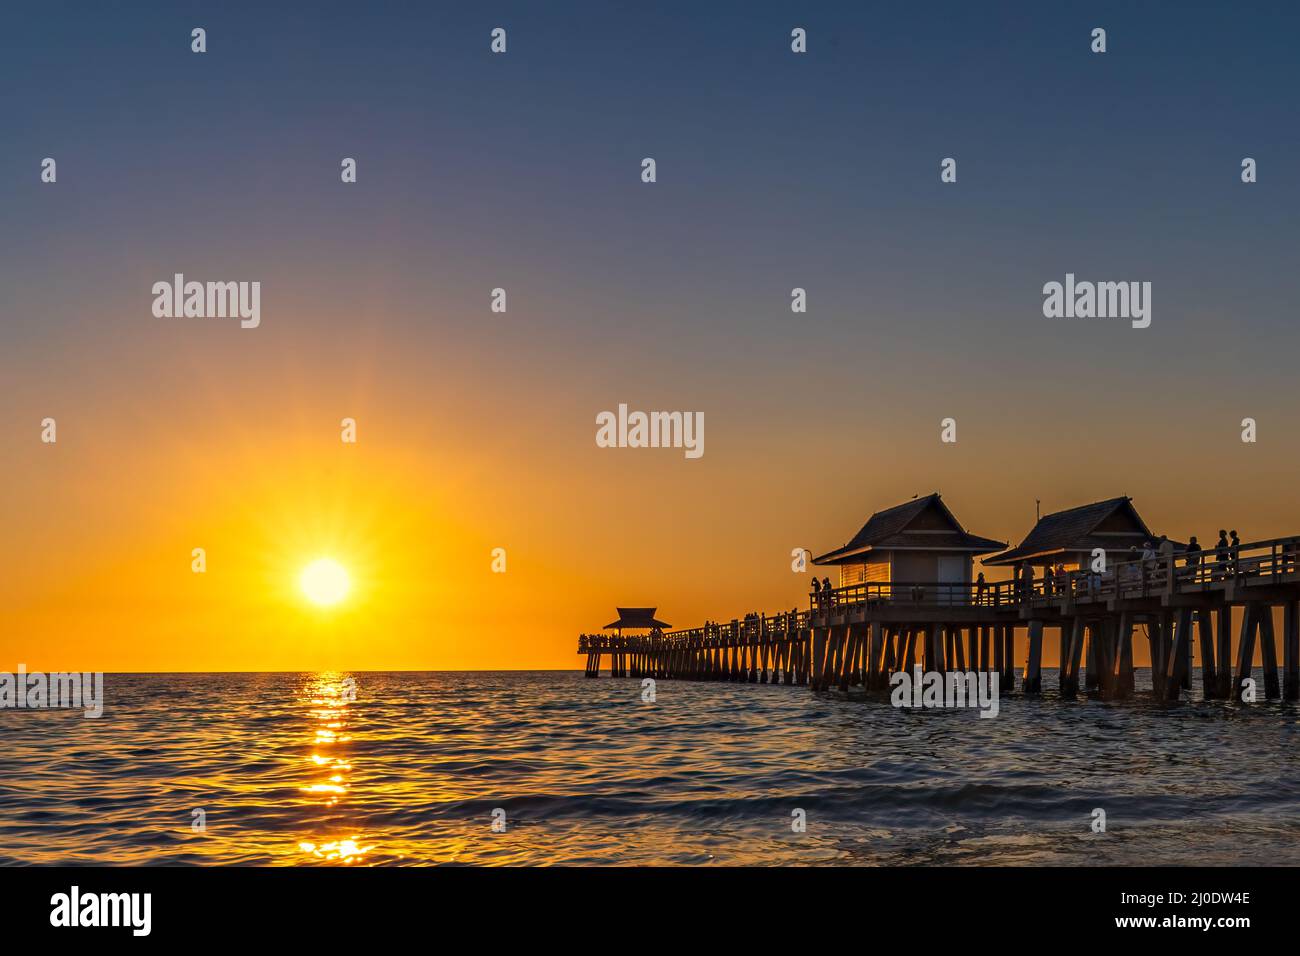 A perfect day comes to a close with a brilliant sunset at the Naples Pier in Collier County, Florida. Stock Photo